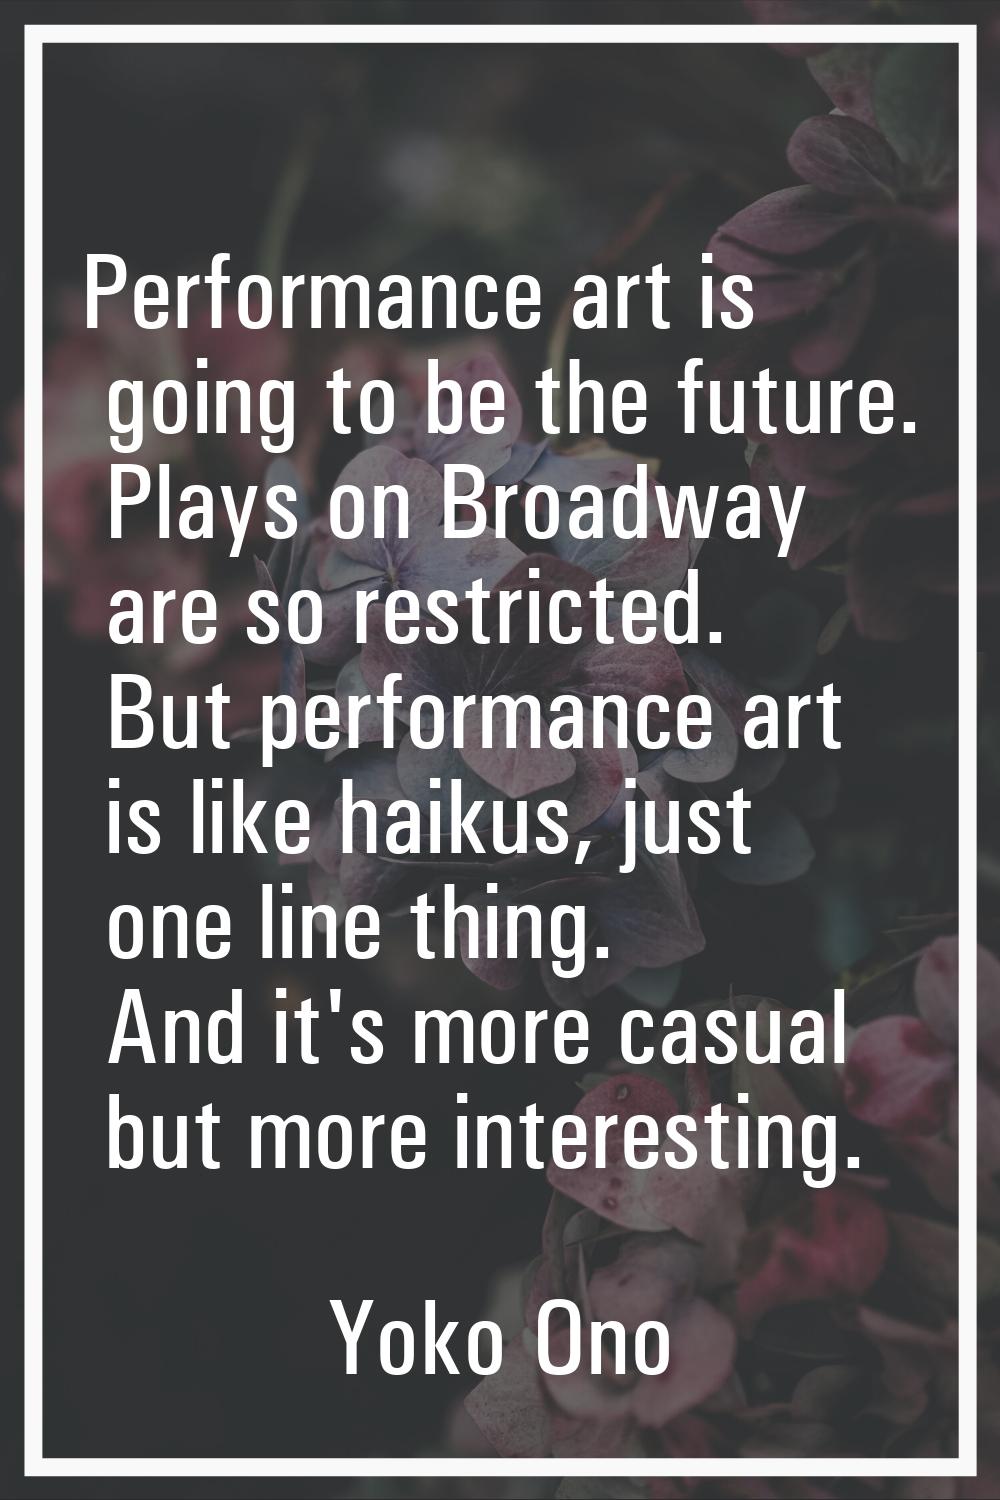 Performance art is going to be the future. Plays on Broadway are so restricted. But performance art